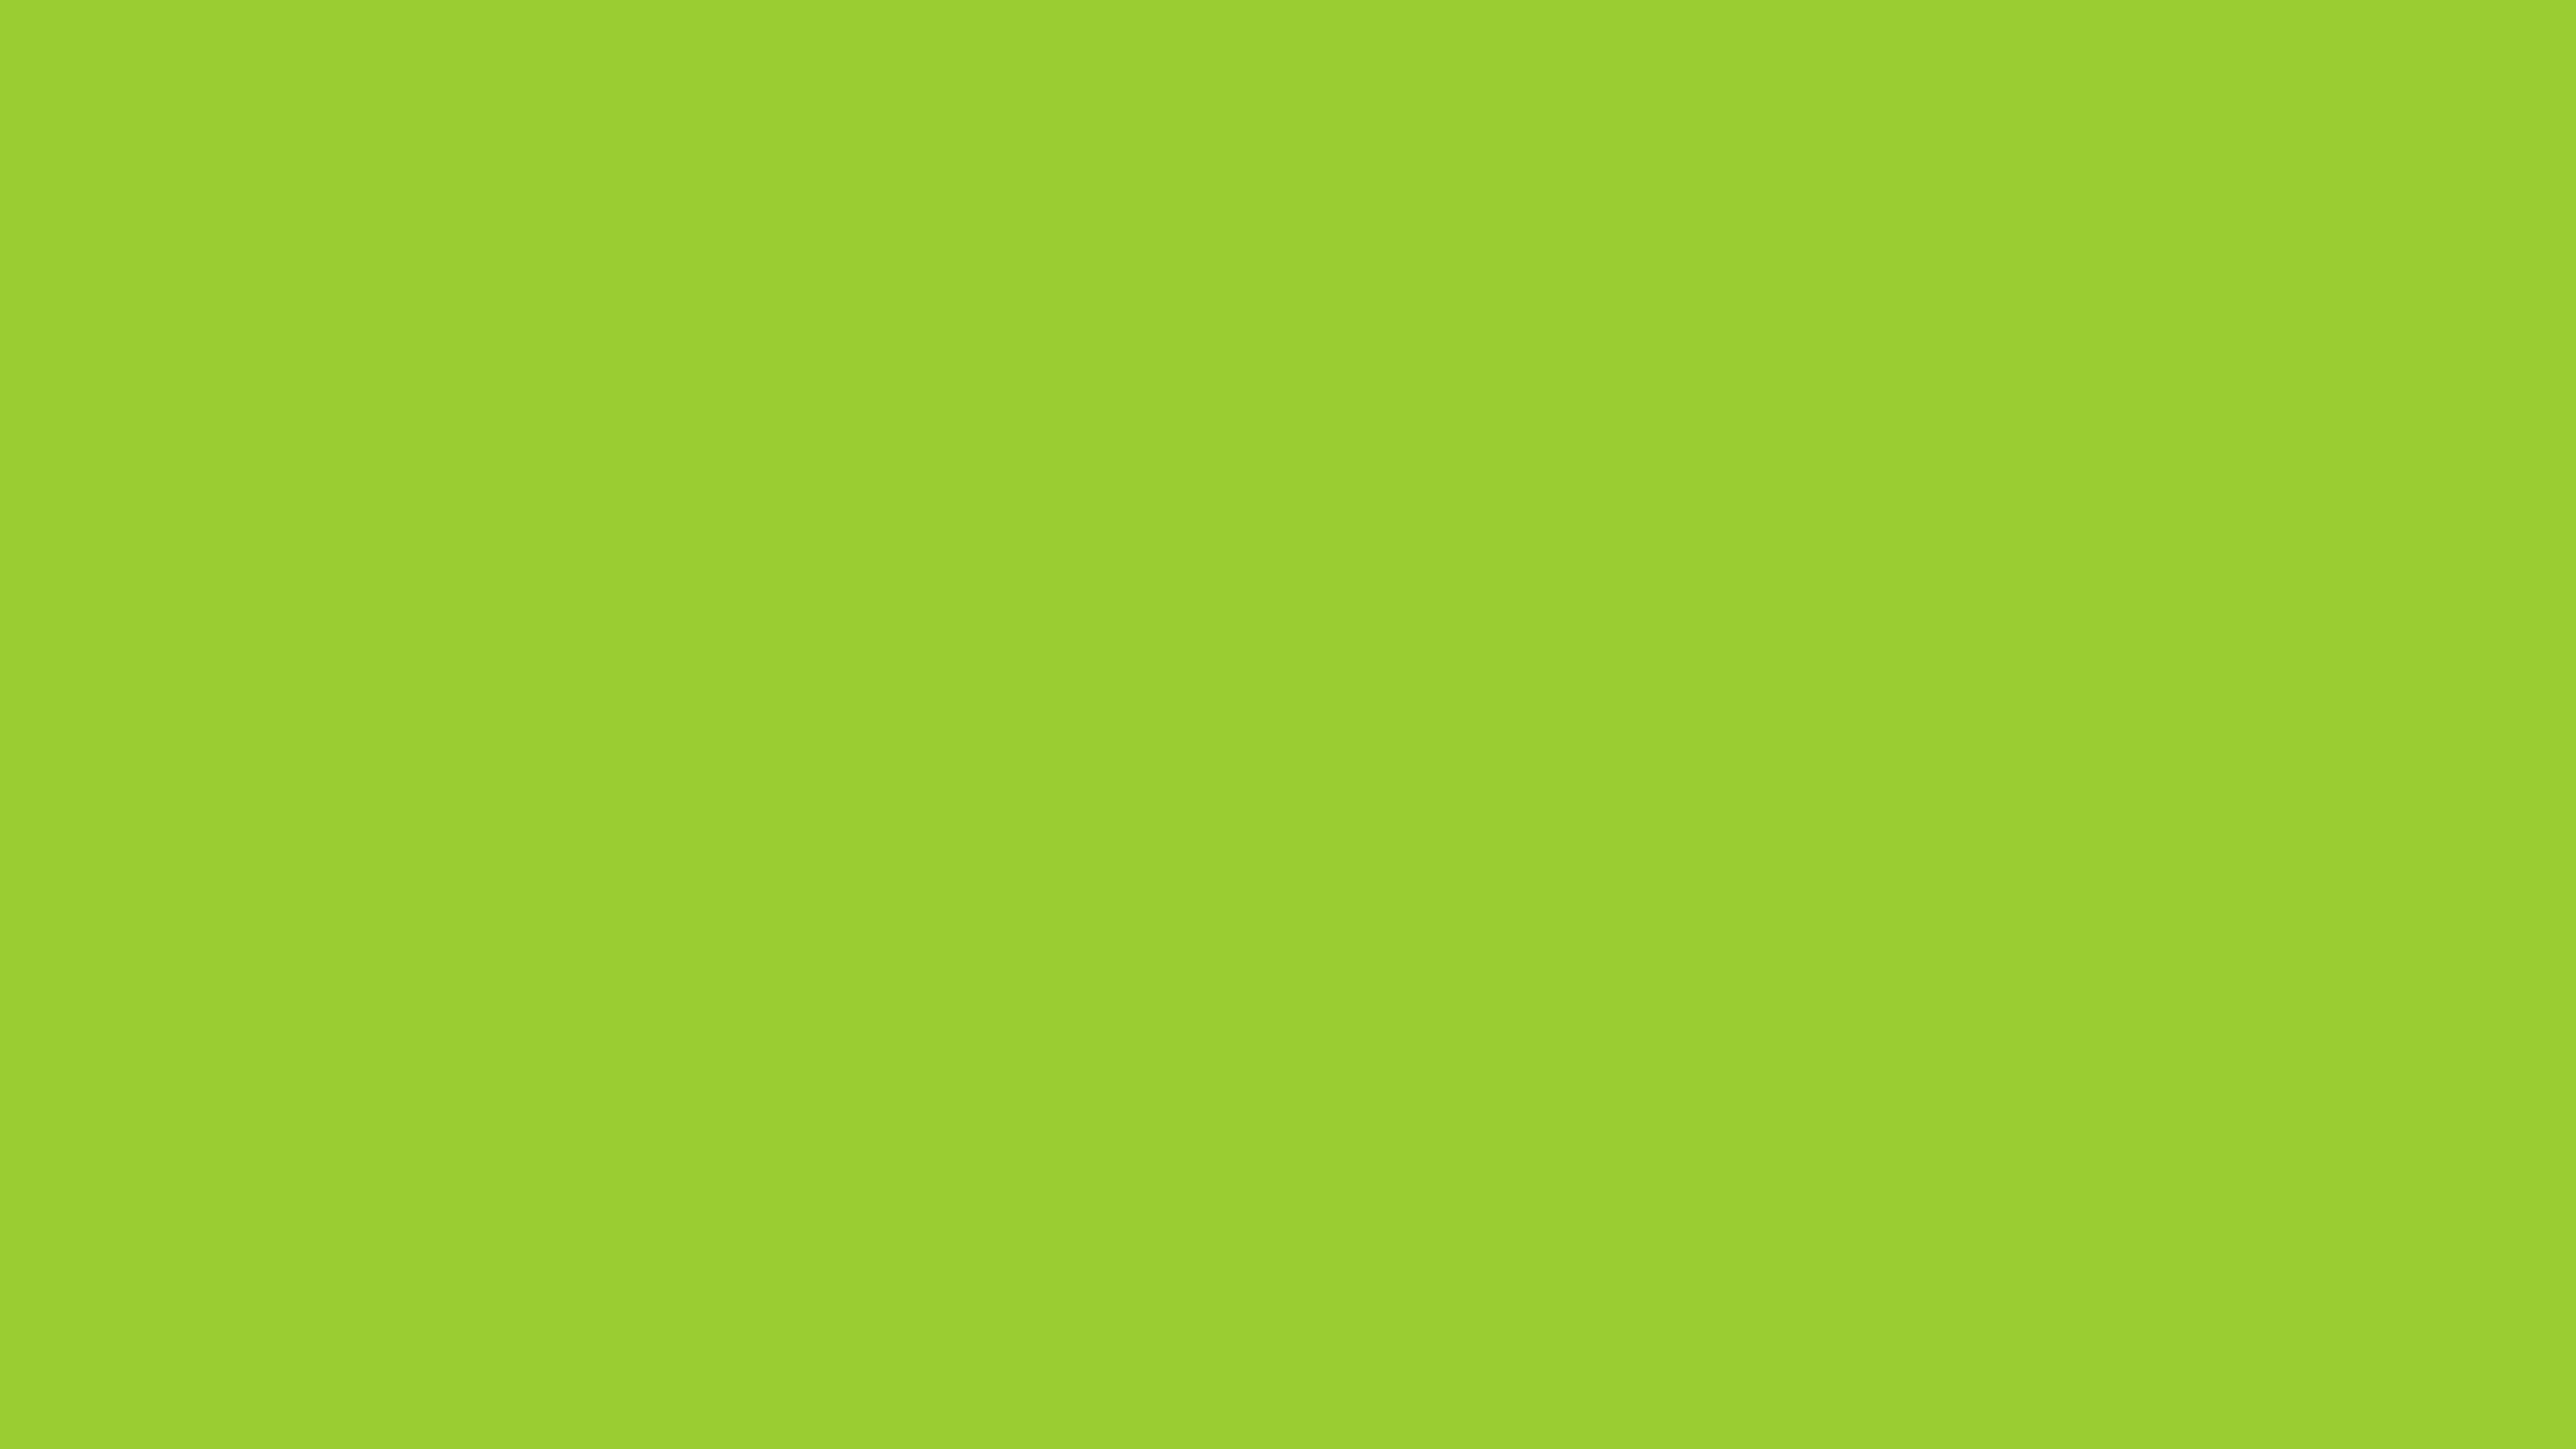 7680x4320 Yellow-green Solid Color Background